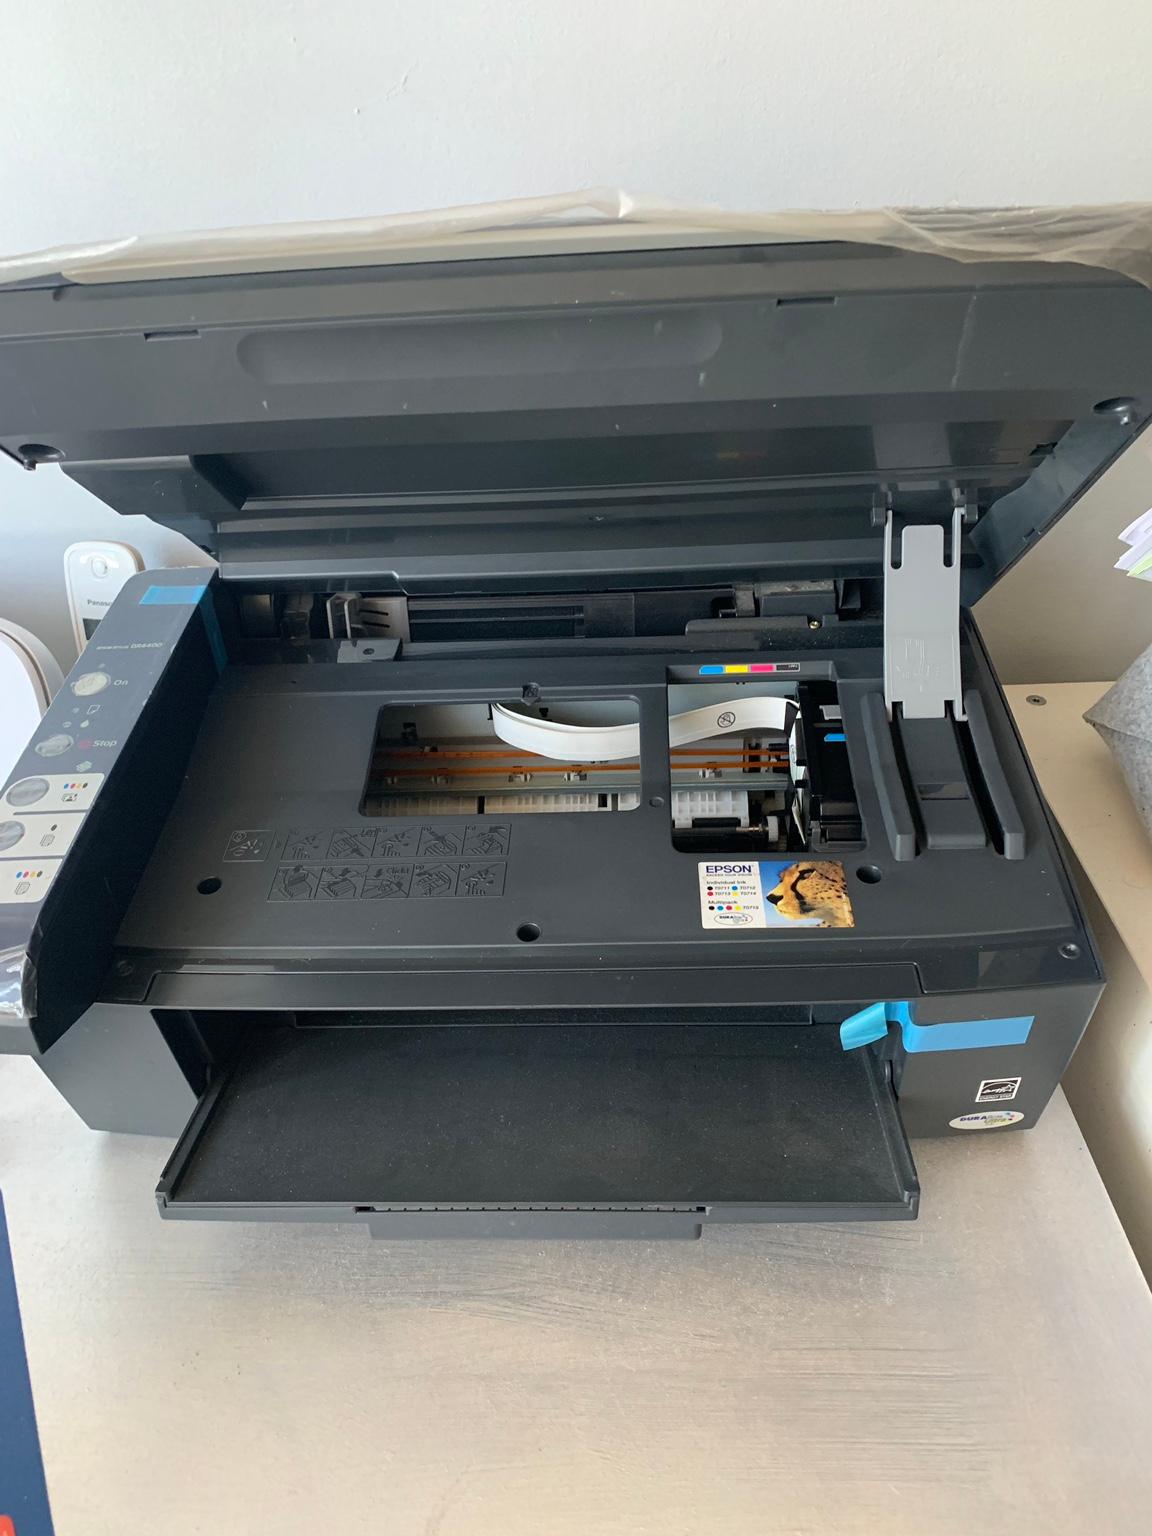 Stampante Epson Stylus Dx4400 In 20152 Milano For €2000 For Sale Shpock 7539